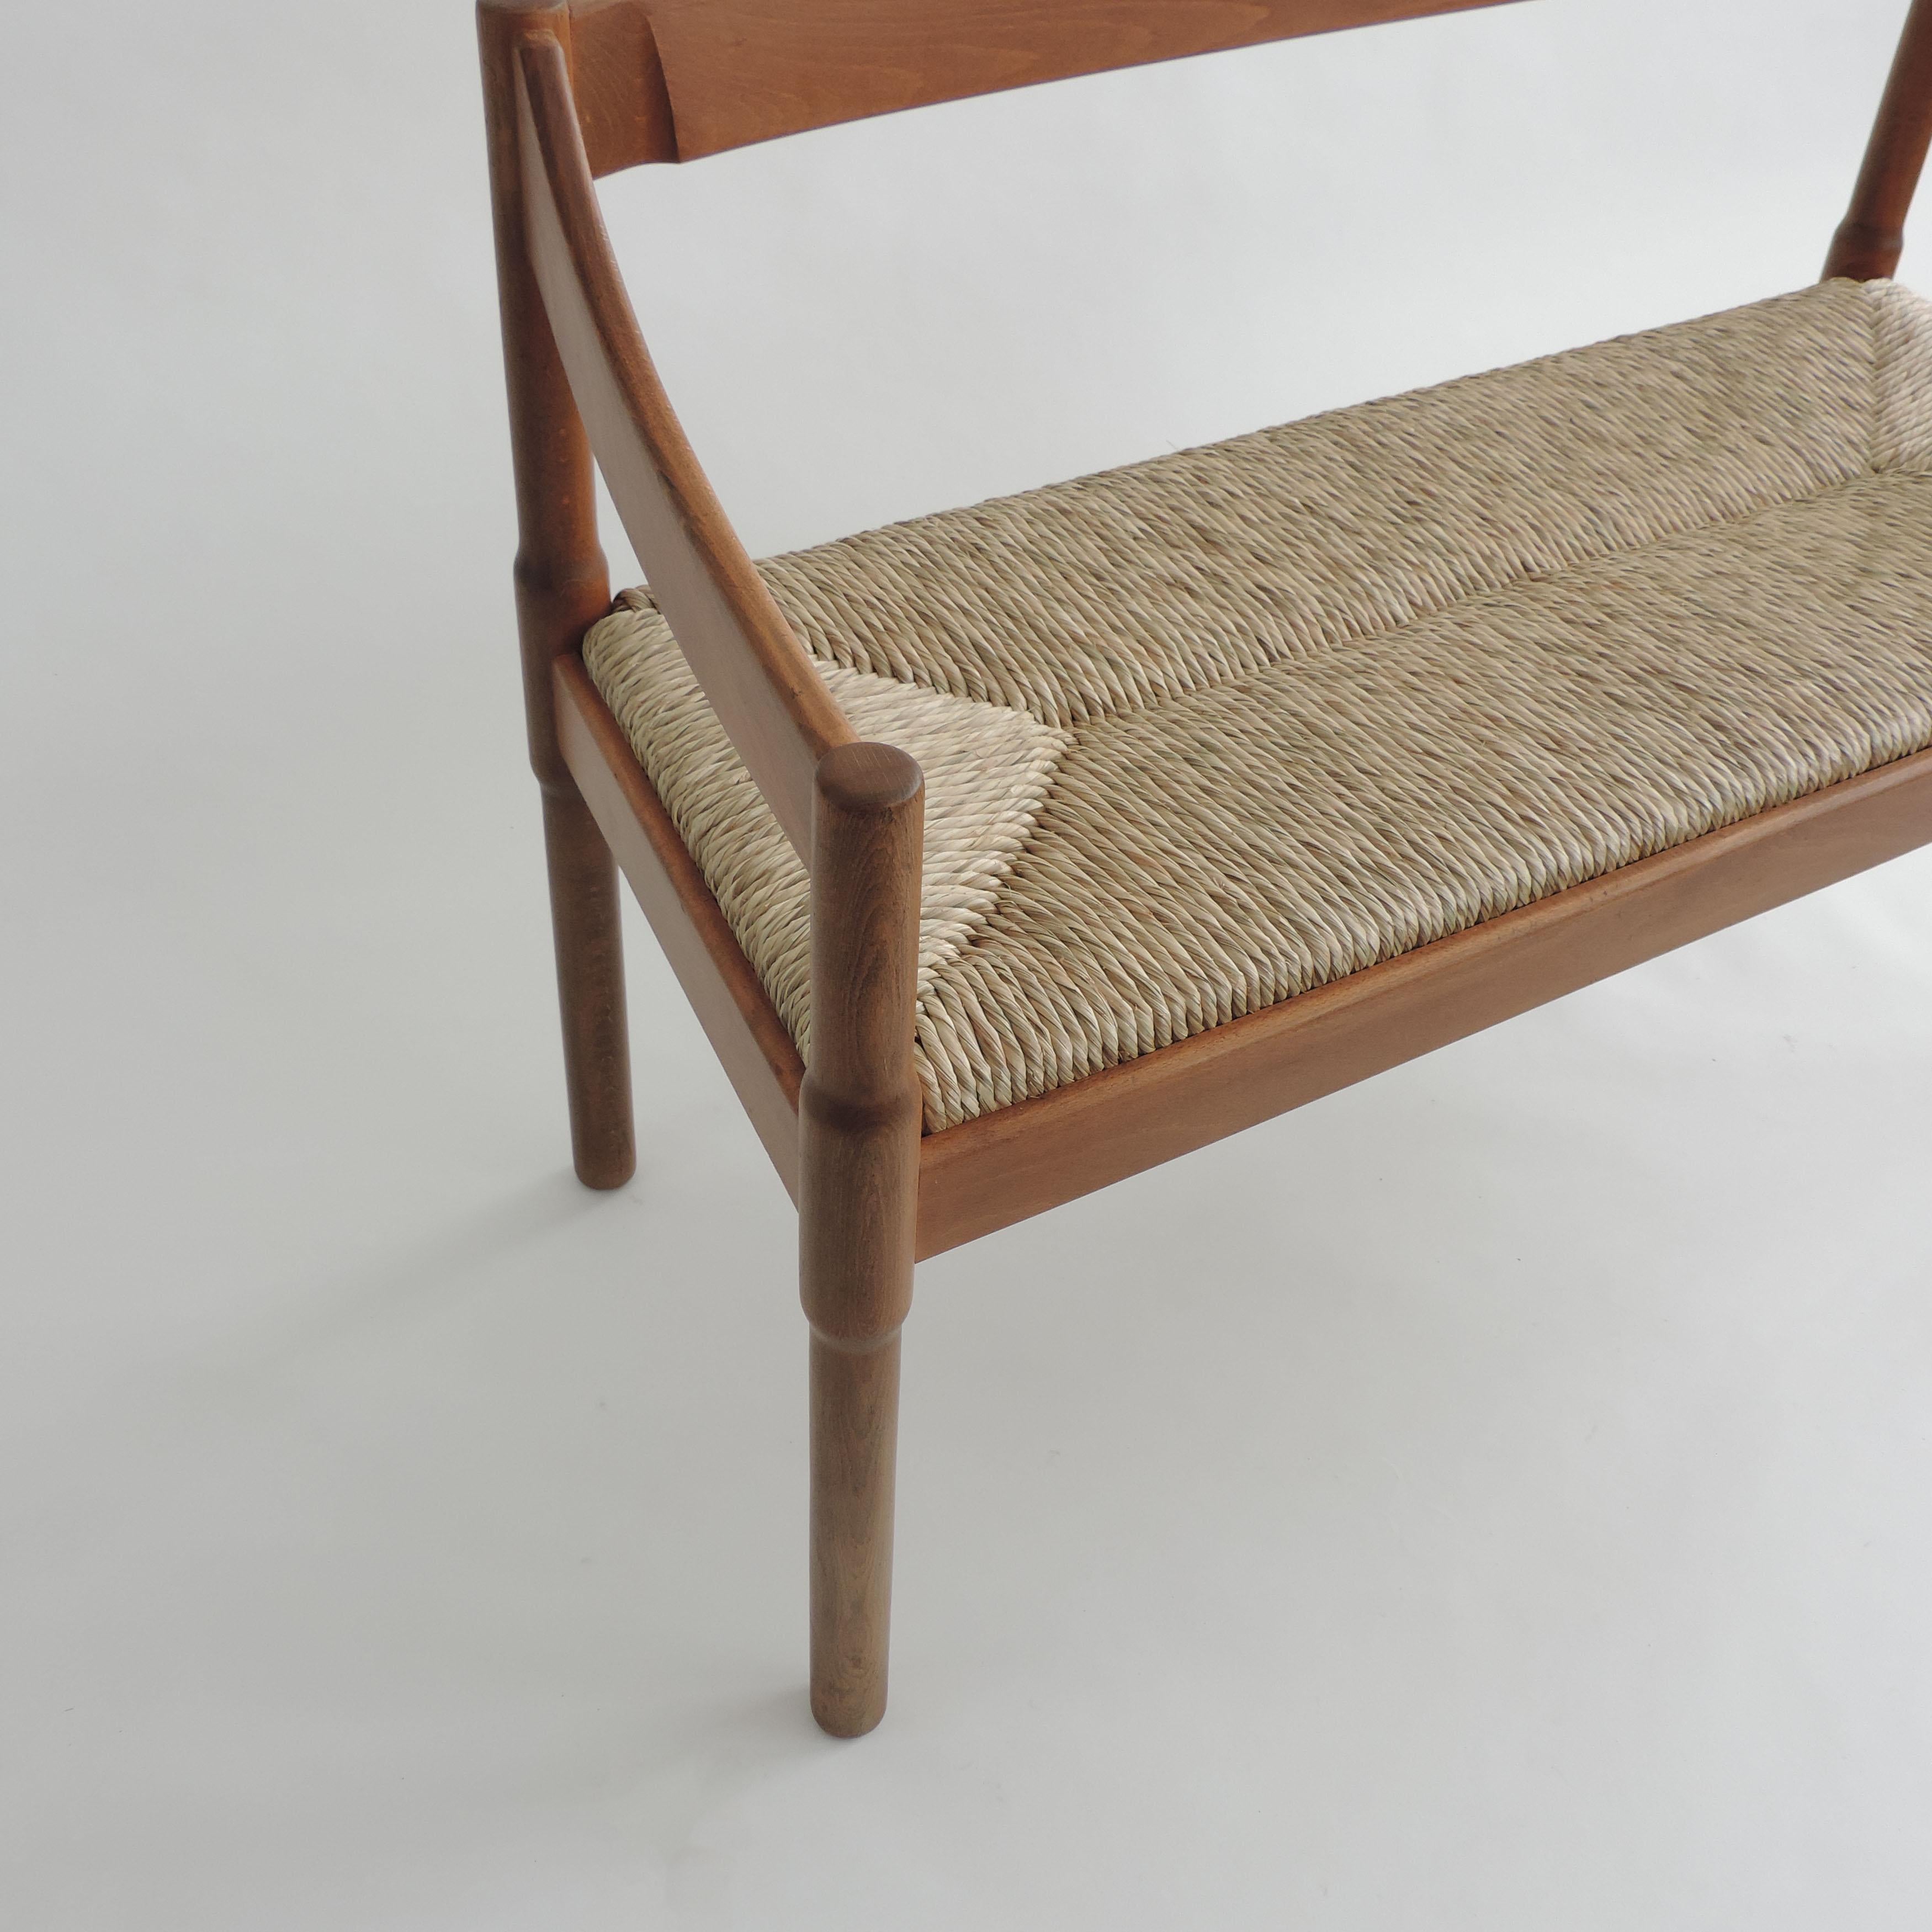 Mid-20th Century Vico Magistretti Carimate Wood and Straw Seat Settee for Cassina, Italy 1960s